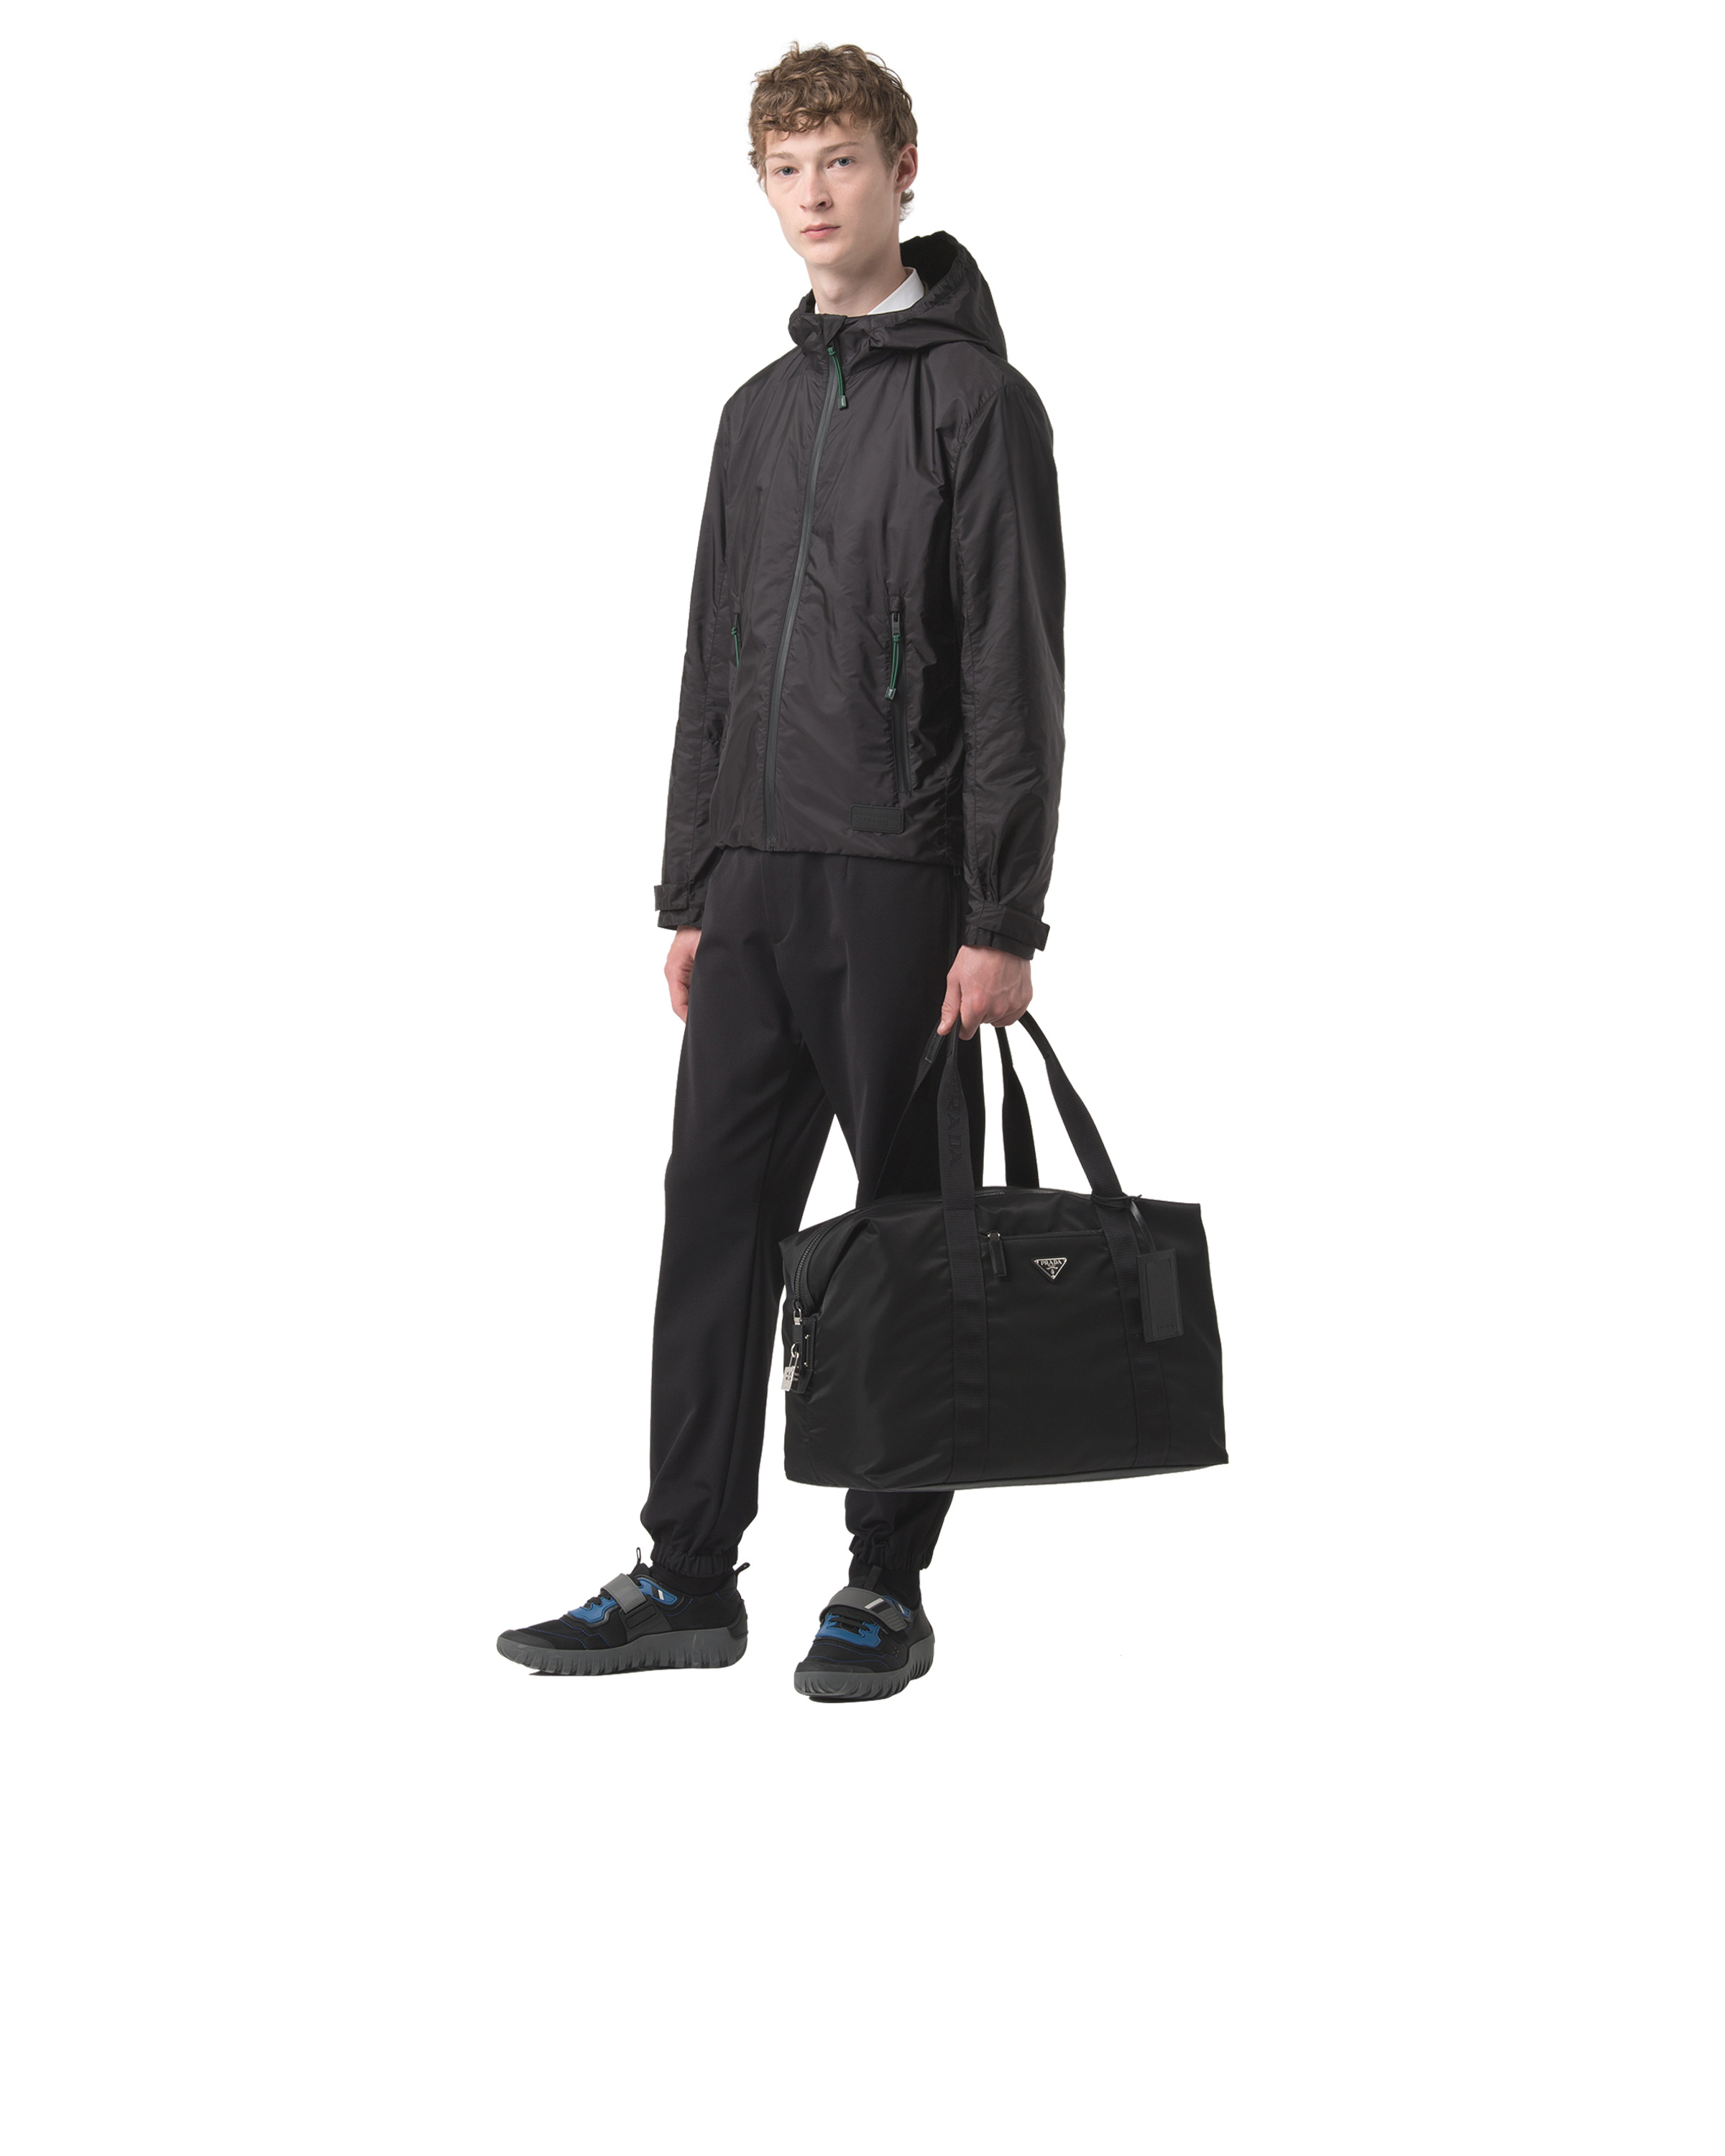 Re-Nylon and Saffiano leather duffle bag - 8